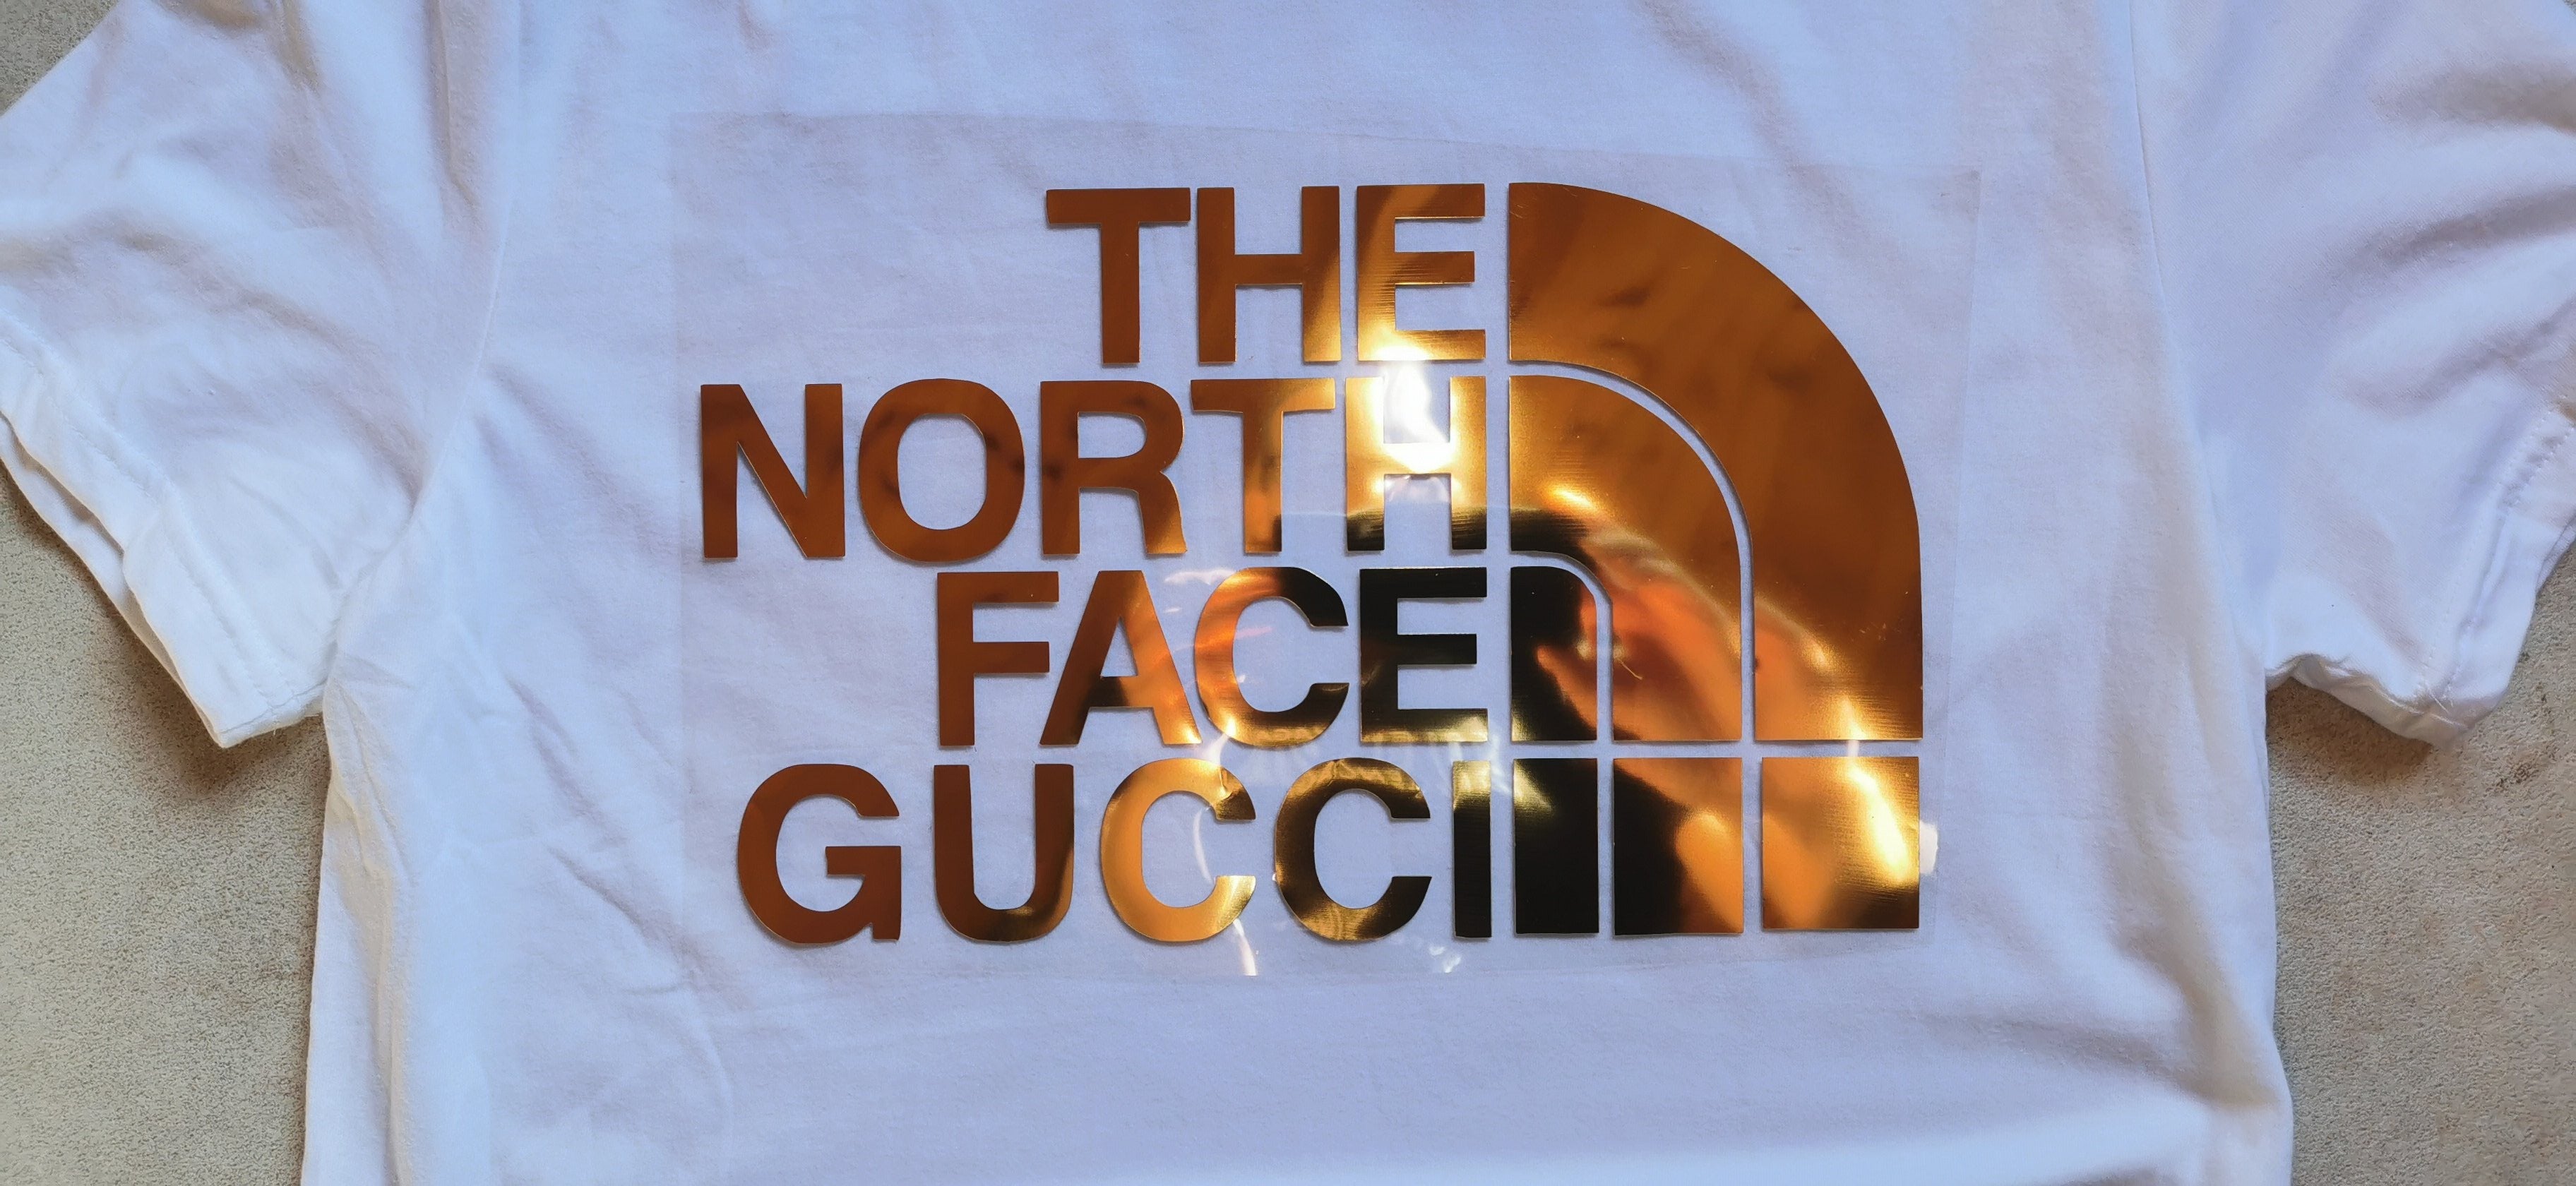 The North Face x gucci collaboration Logo Sticker Iron-on – Customeazy